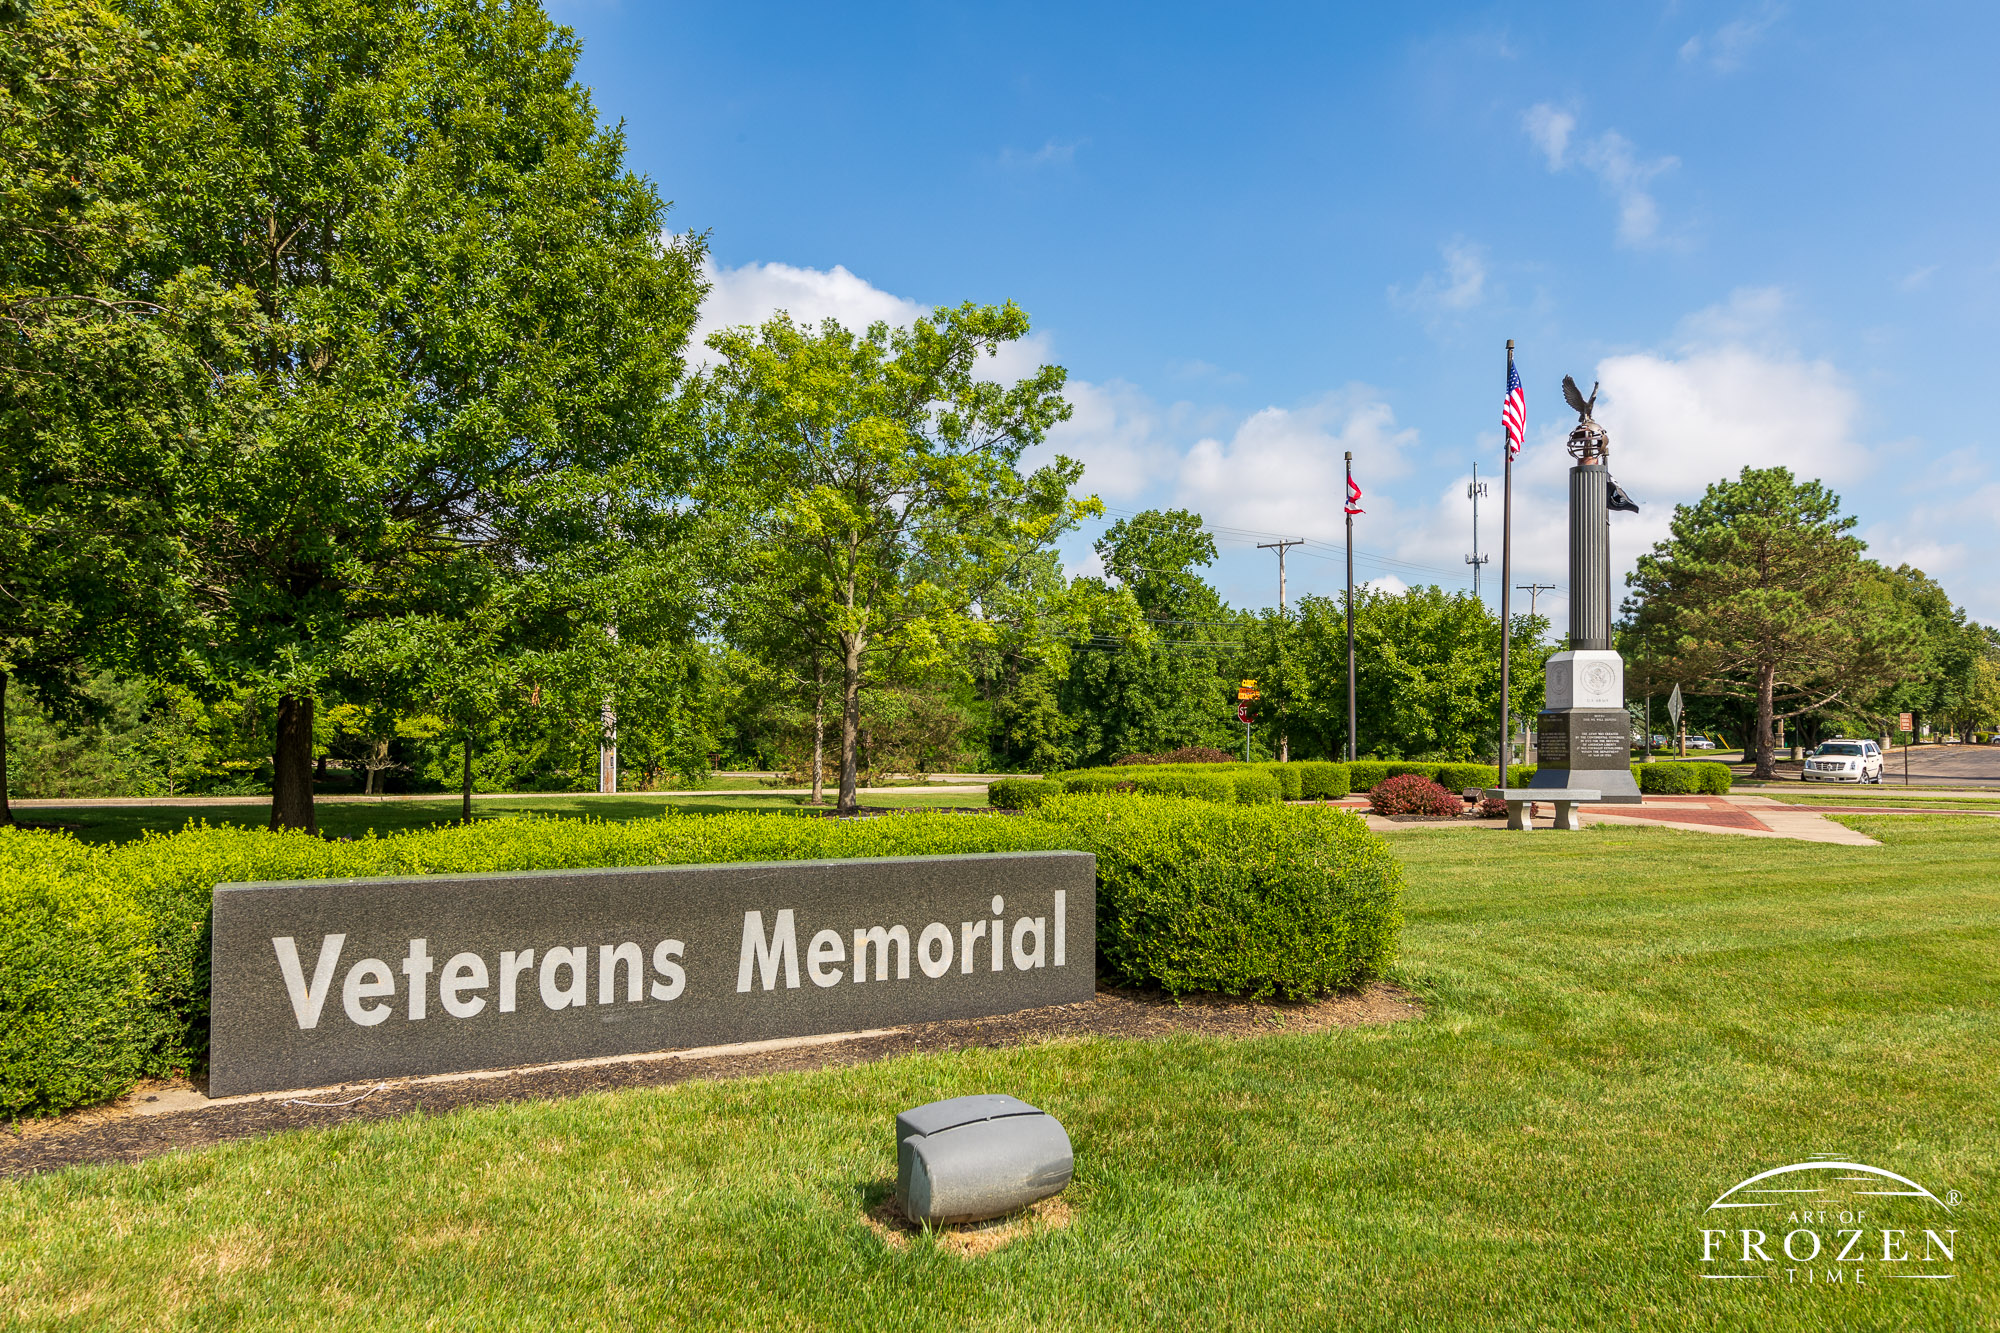 The Beavercreek Veterans Memorial on a sunny day with puffy clouds which honors local veterans from each of the five services